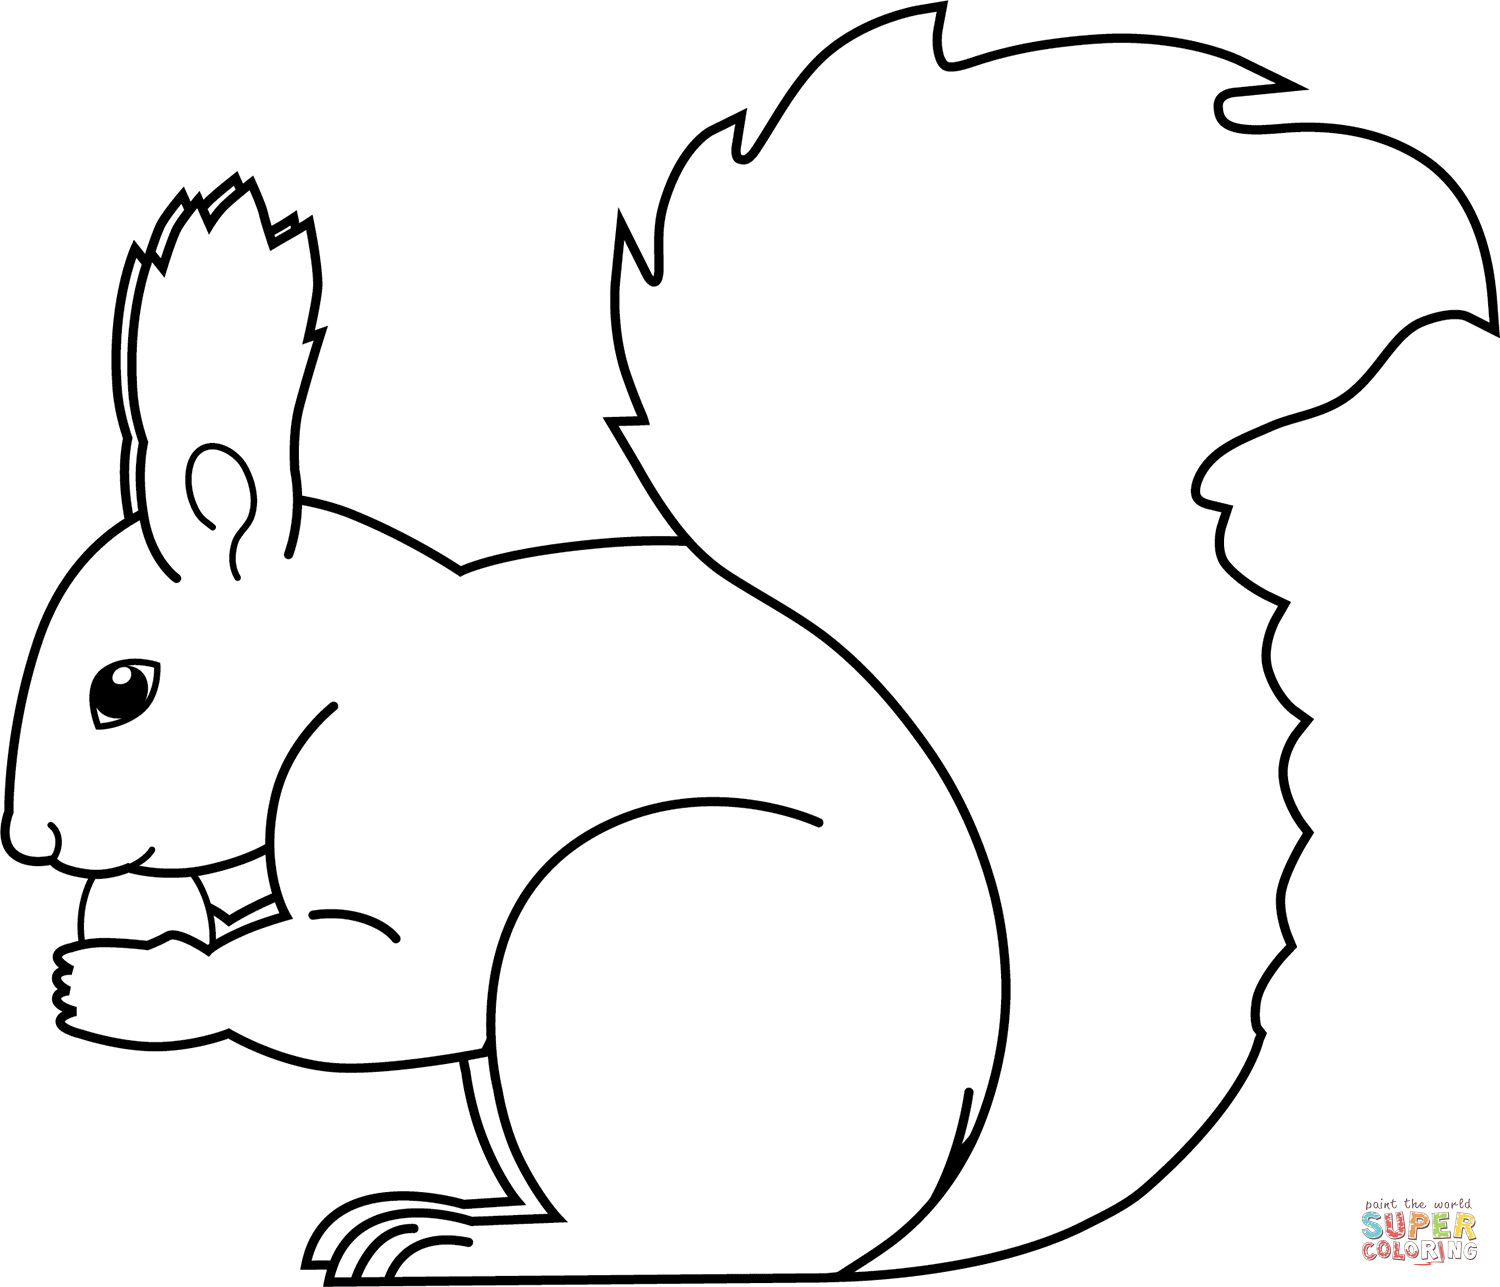 Squirrel coloring page free printable coloring pages